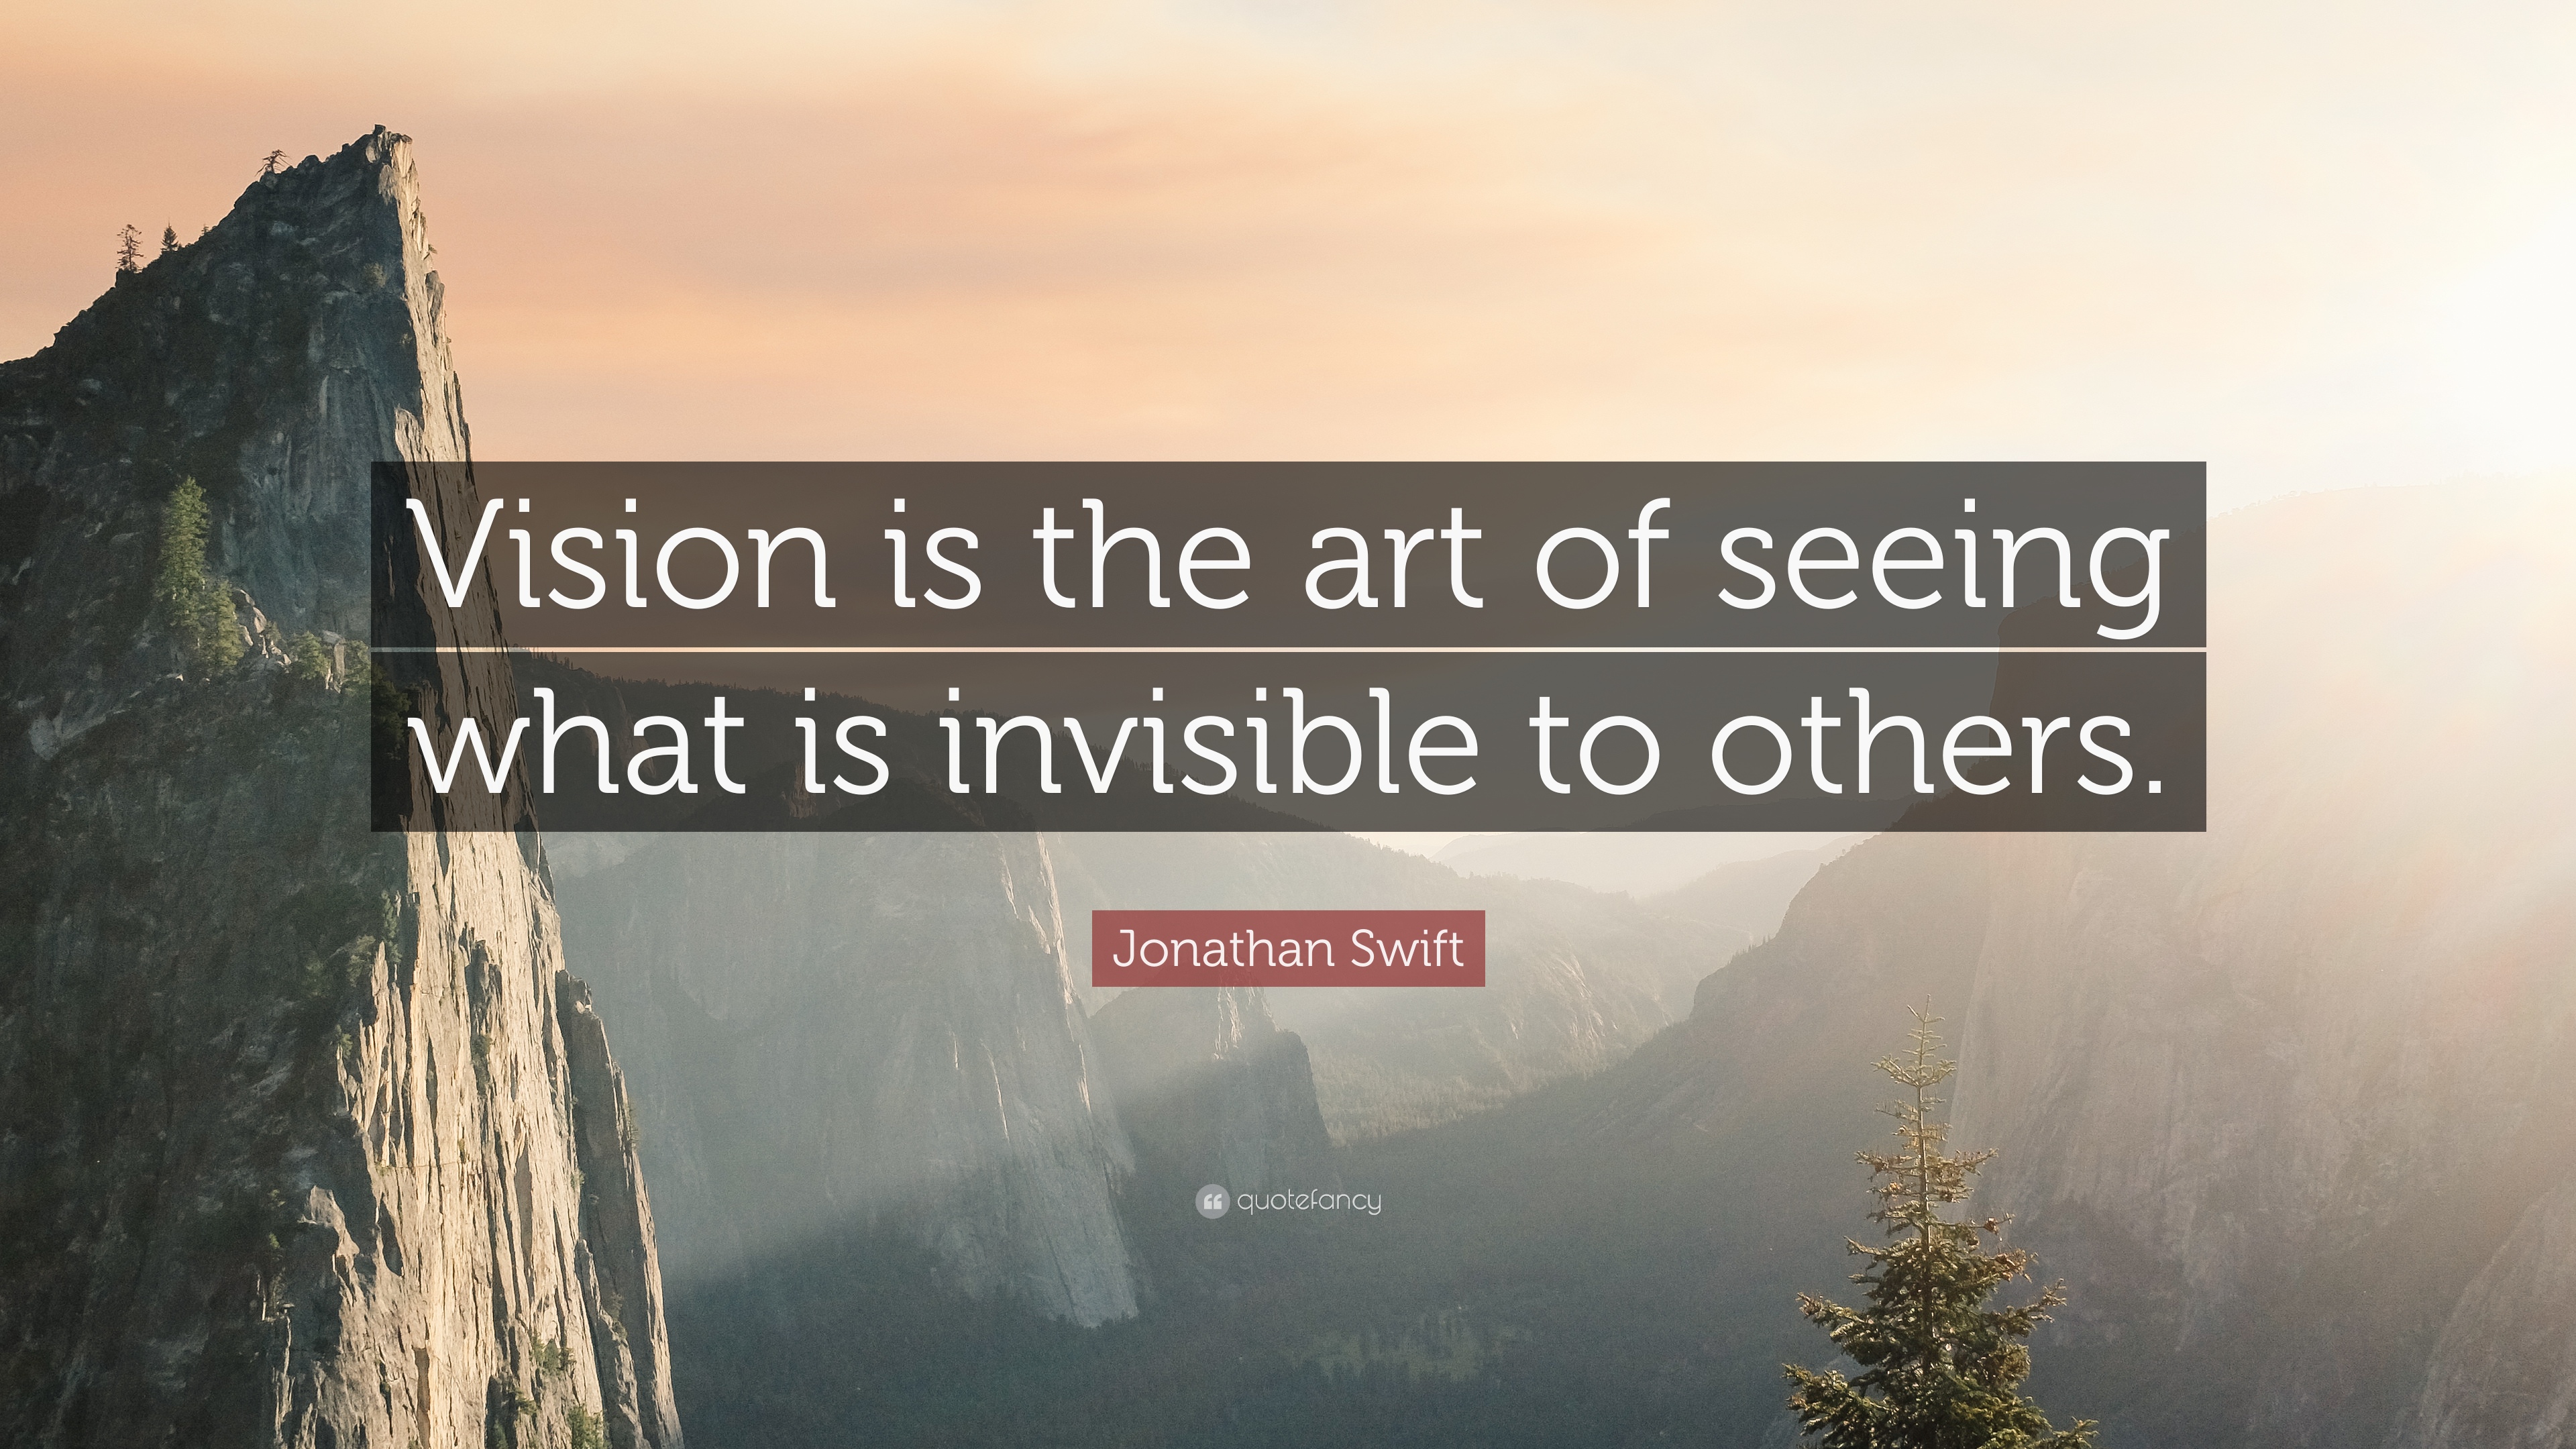 Jonathan Swift Quote: “Vision is the art of seeing what is